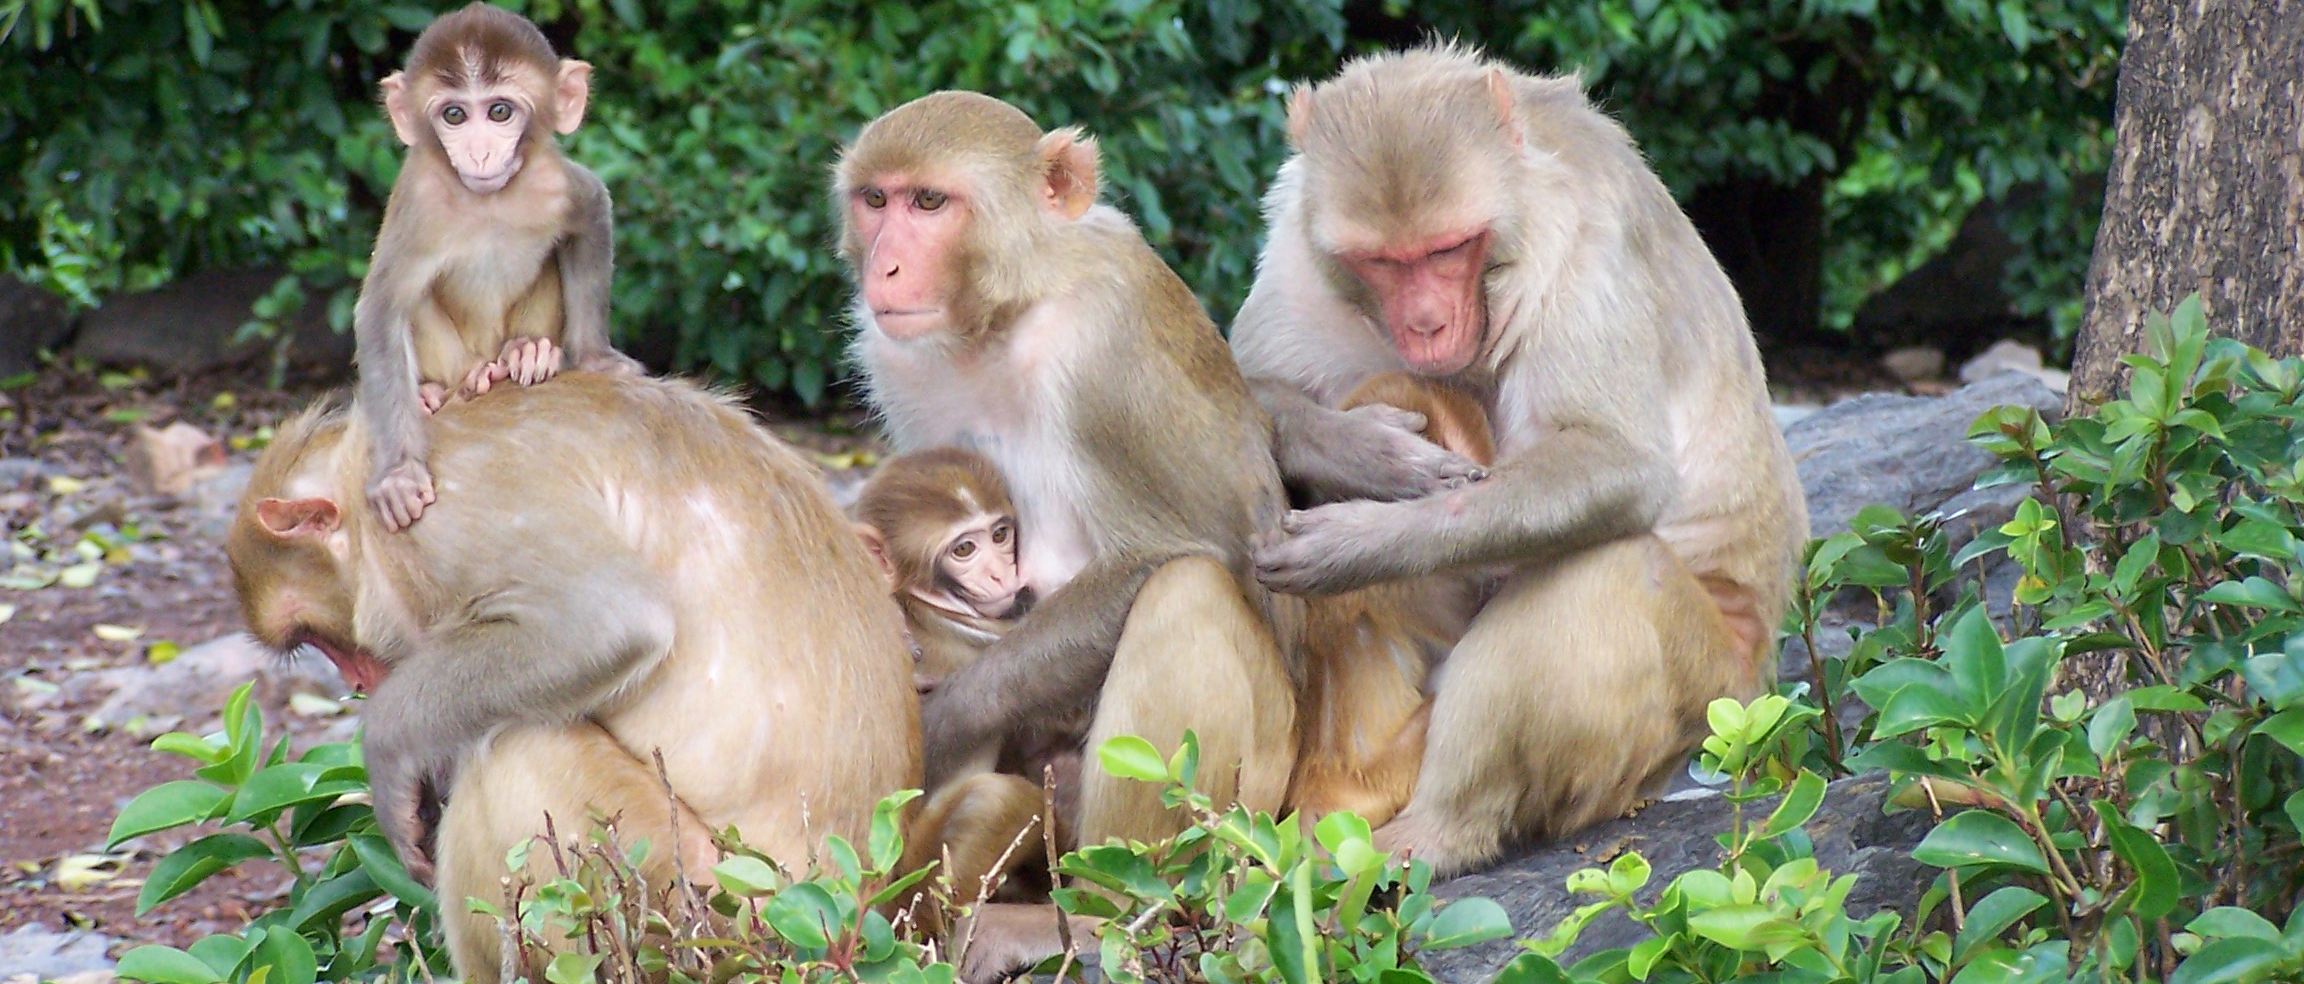 Image - Rhesus macaques became more social after Hurricane Maria